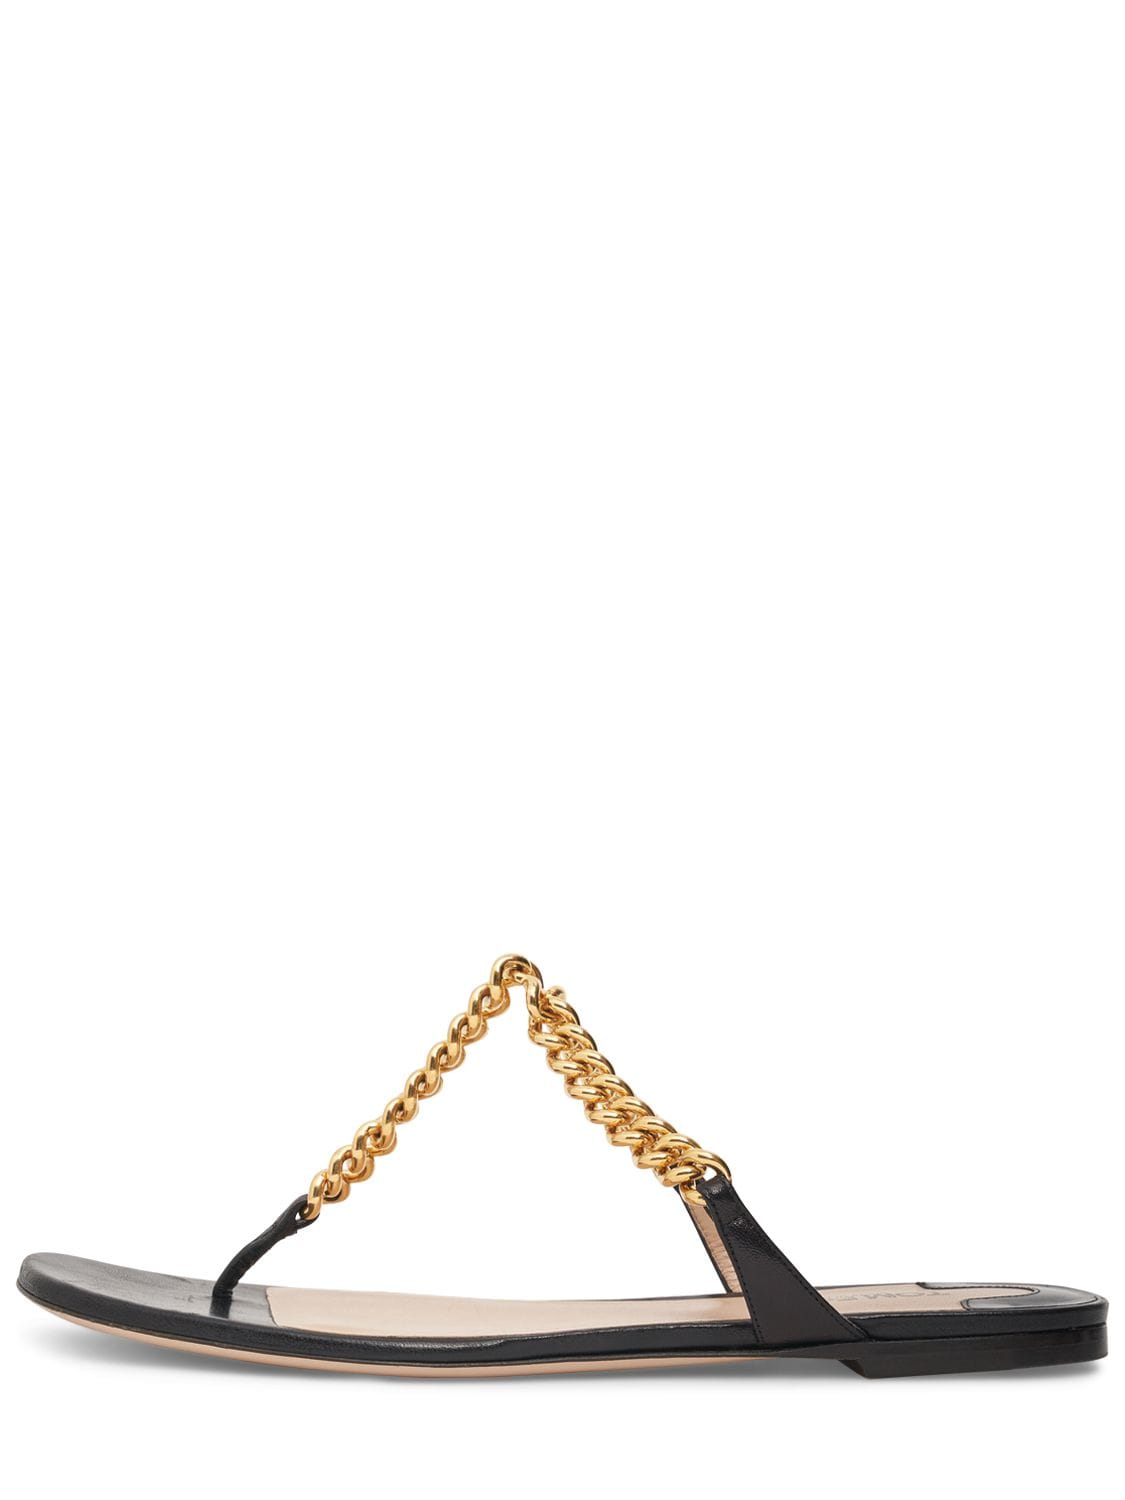 Image of 10mm Zenith Leather & Chain Flat Sandals